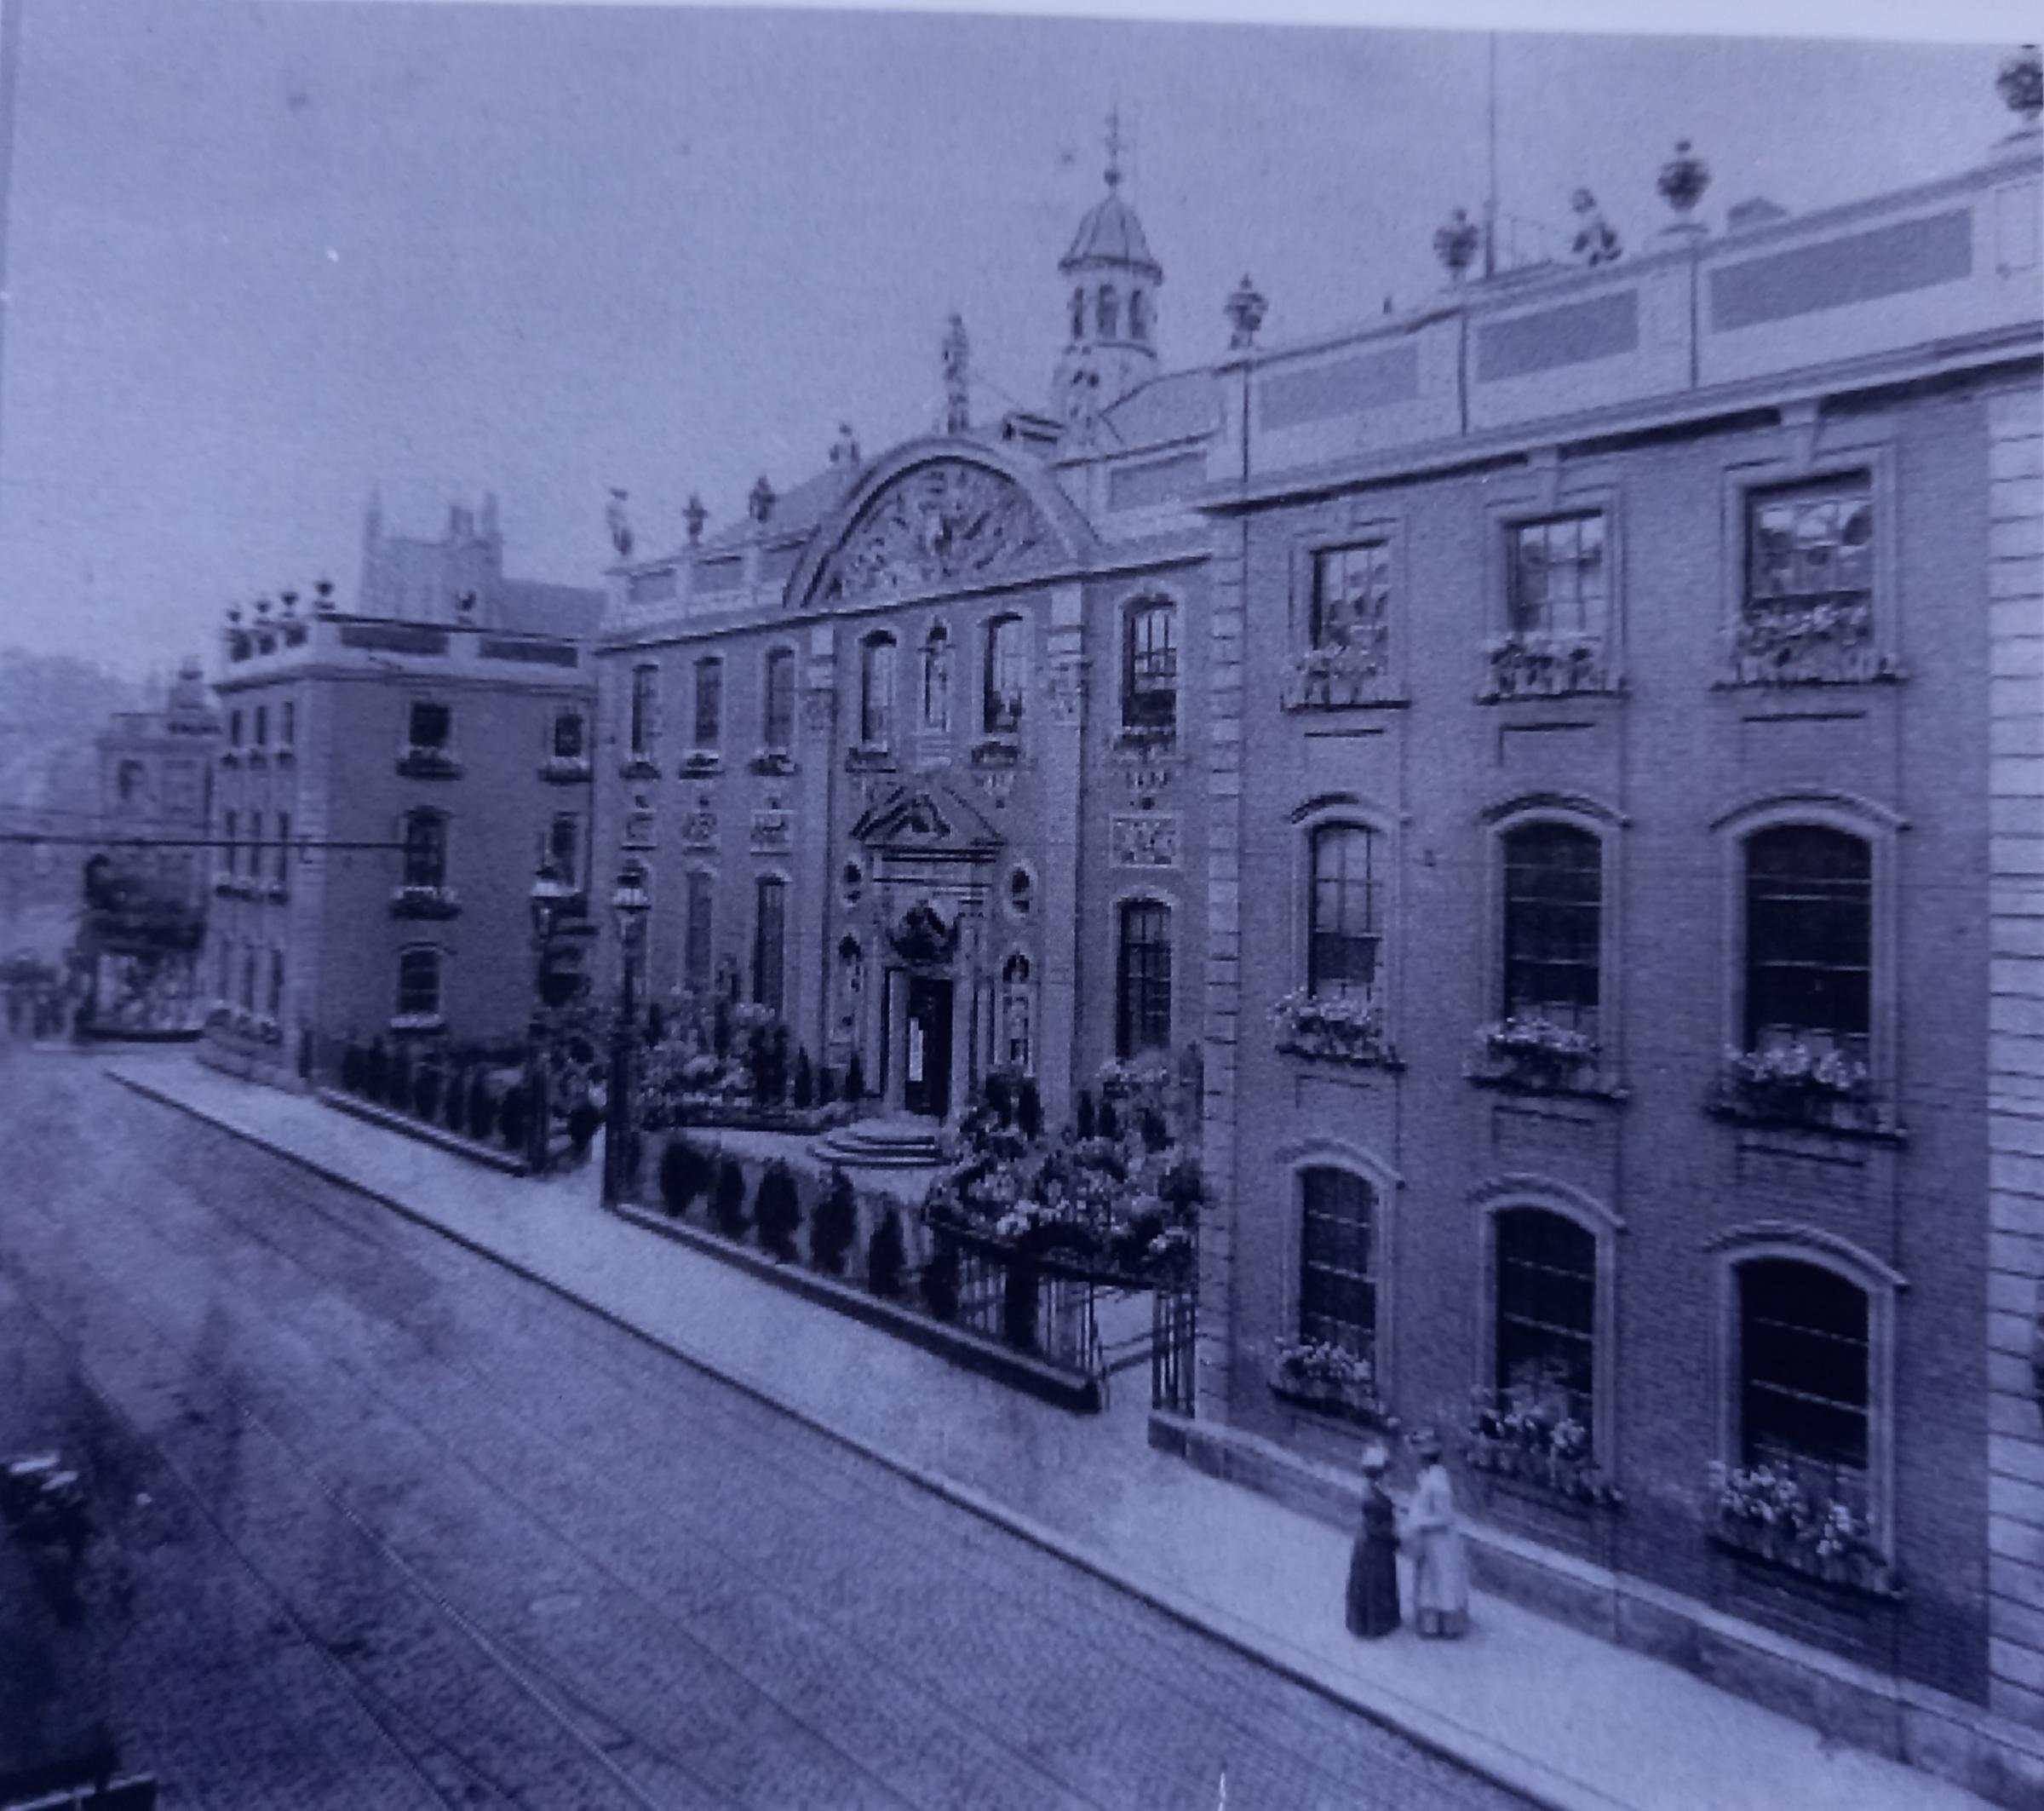 Worcester Guildhall, where election results have traditionally been announced, decked in bunting and flowers in 1902 to celebrate the end of the Boer War